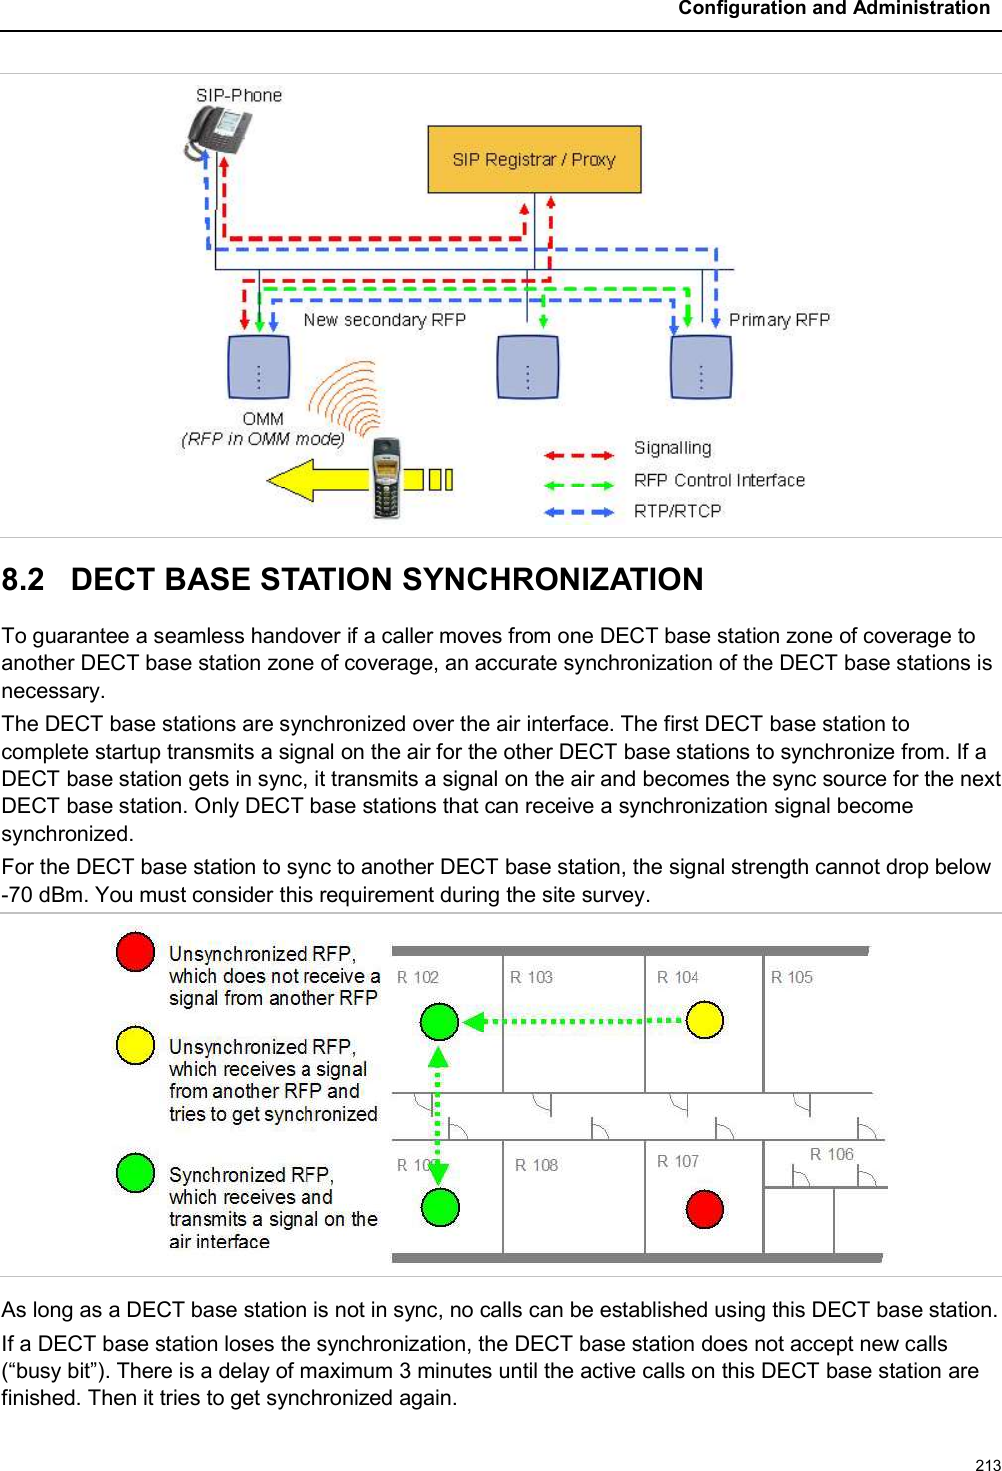 Configuration and Administration2138.2 DECT BASE STATION SYNCHRONIZATIONTo guarantee a seamless handover if a caller moves from one DECT base station zone of coverage to another DECT base station zone of coverage, an accurate synchronization of the DECT base stations is necessary.The DECT base stations are synchronized over the air interface. The first DECT base station to complete startup transmits a signal on the air for the other DECT base stations to synchronize from. If aDECT base station gets in sync, it transmits a signal on the air and becomes the sync source for the next DECT base station. Only DECT base stations that can receive a synchronization signal become synchronized.For the DECT base station to sync to another DECT base station, the signal strength cannot drop below -70 dBm. You must consider this requirement during the site survey.As long as a DECT base station is not in sync, no calls can be established using this DECT base station.If a DECT base station loses the synchronization, the DECT base station does not accept new calls (“busy bit”). There is a delay of maximum 3 minutes until the active calls on this DECT base station are finished. Then it tries to get synchronized again.